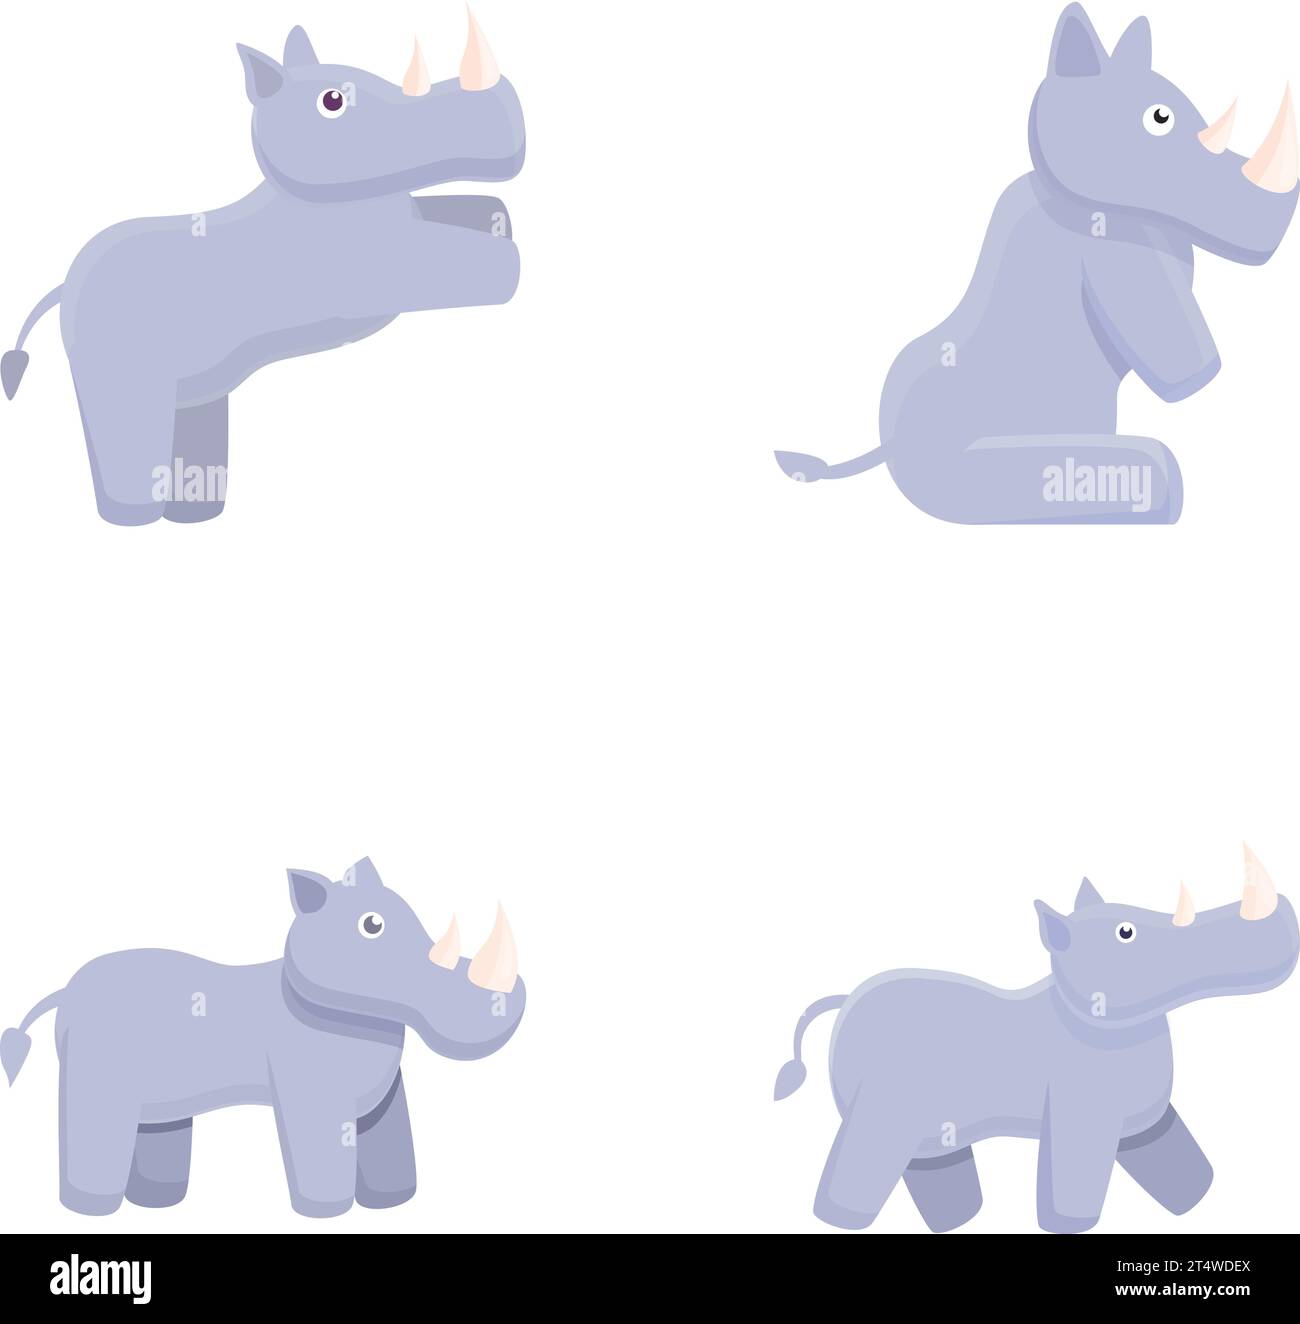 Cartoon grey rhino character Stock Vector Images - Page 2 - Alamy